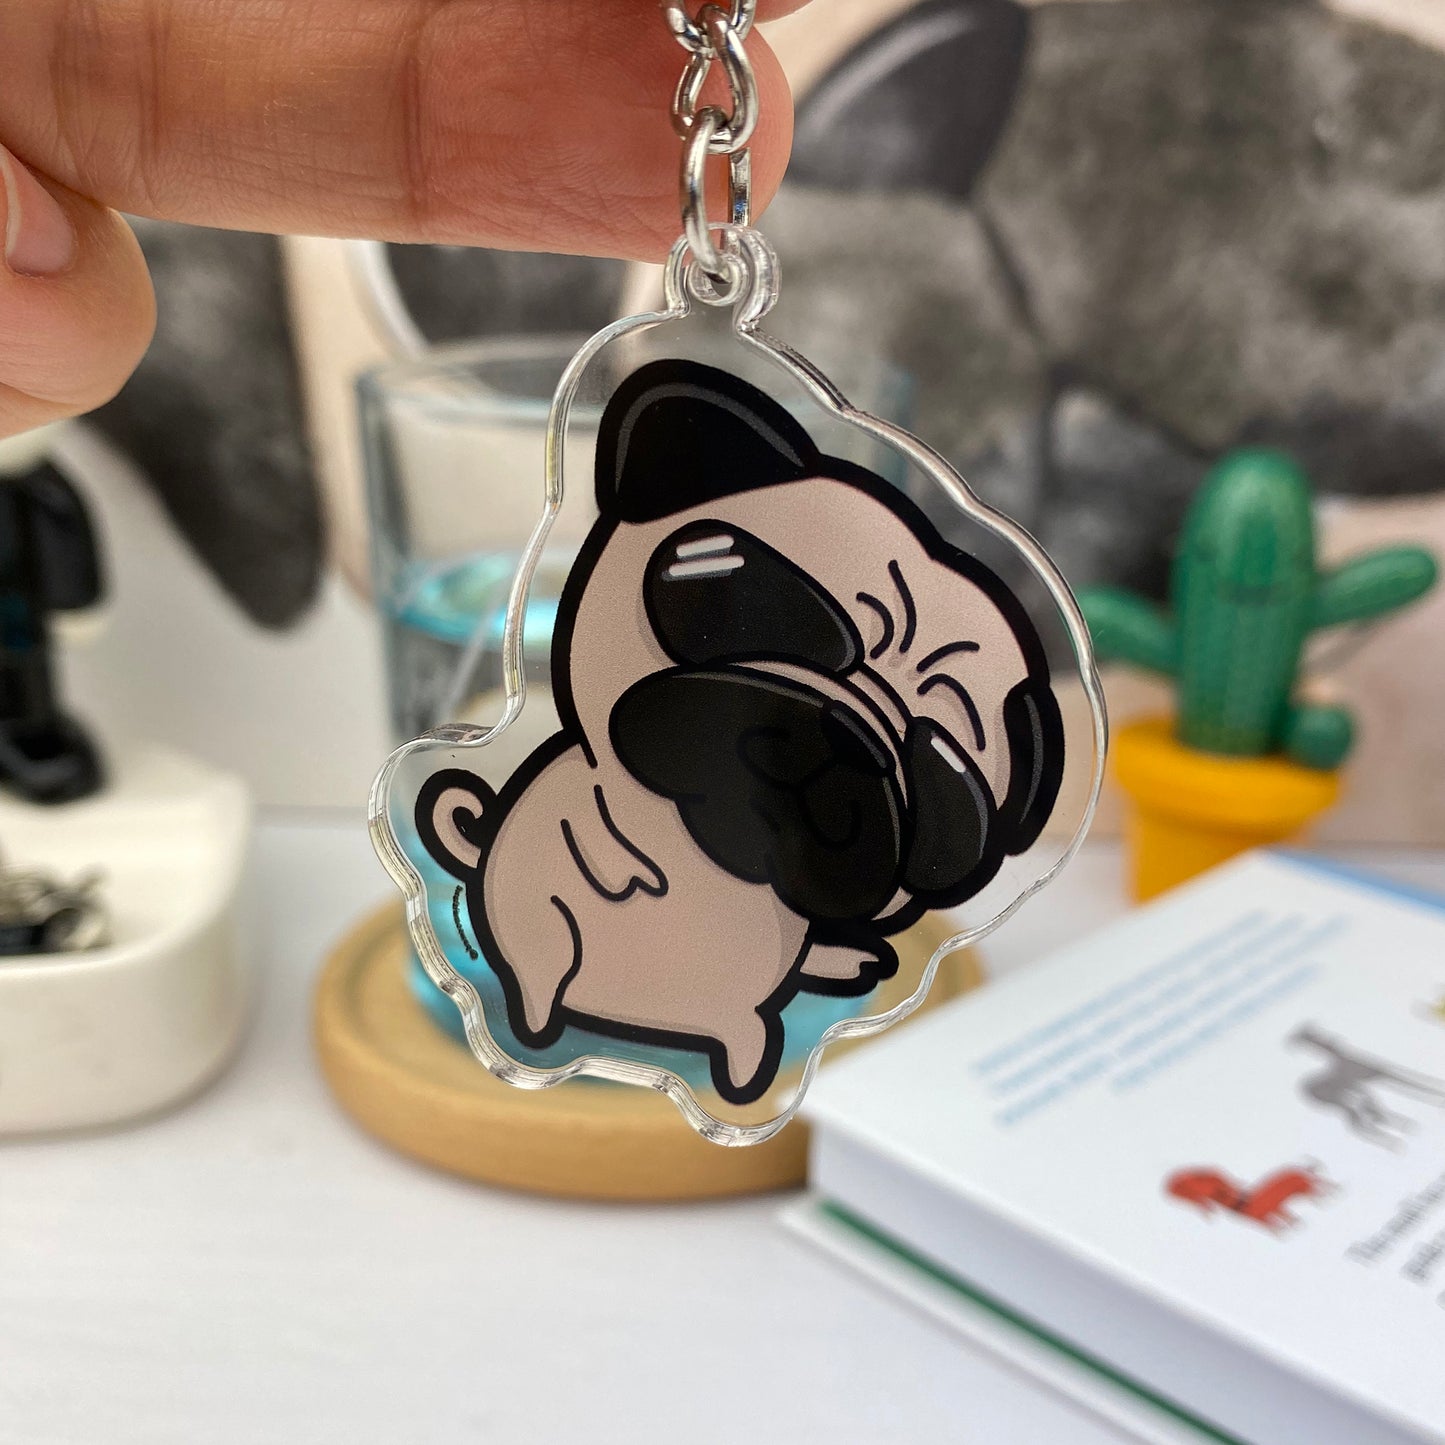 Starling Mike double-sided keychain it's cool